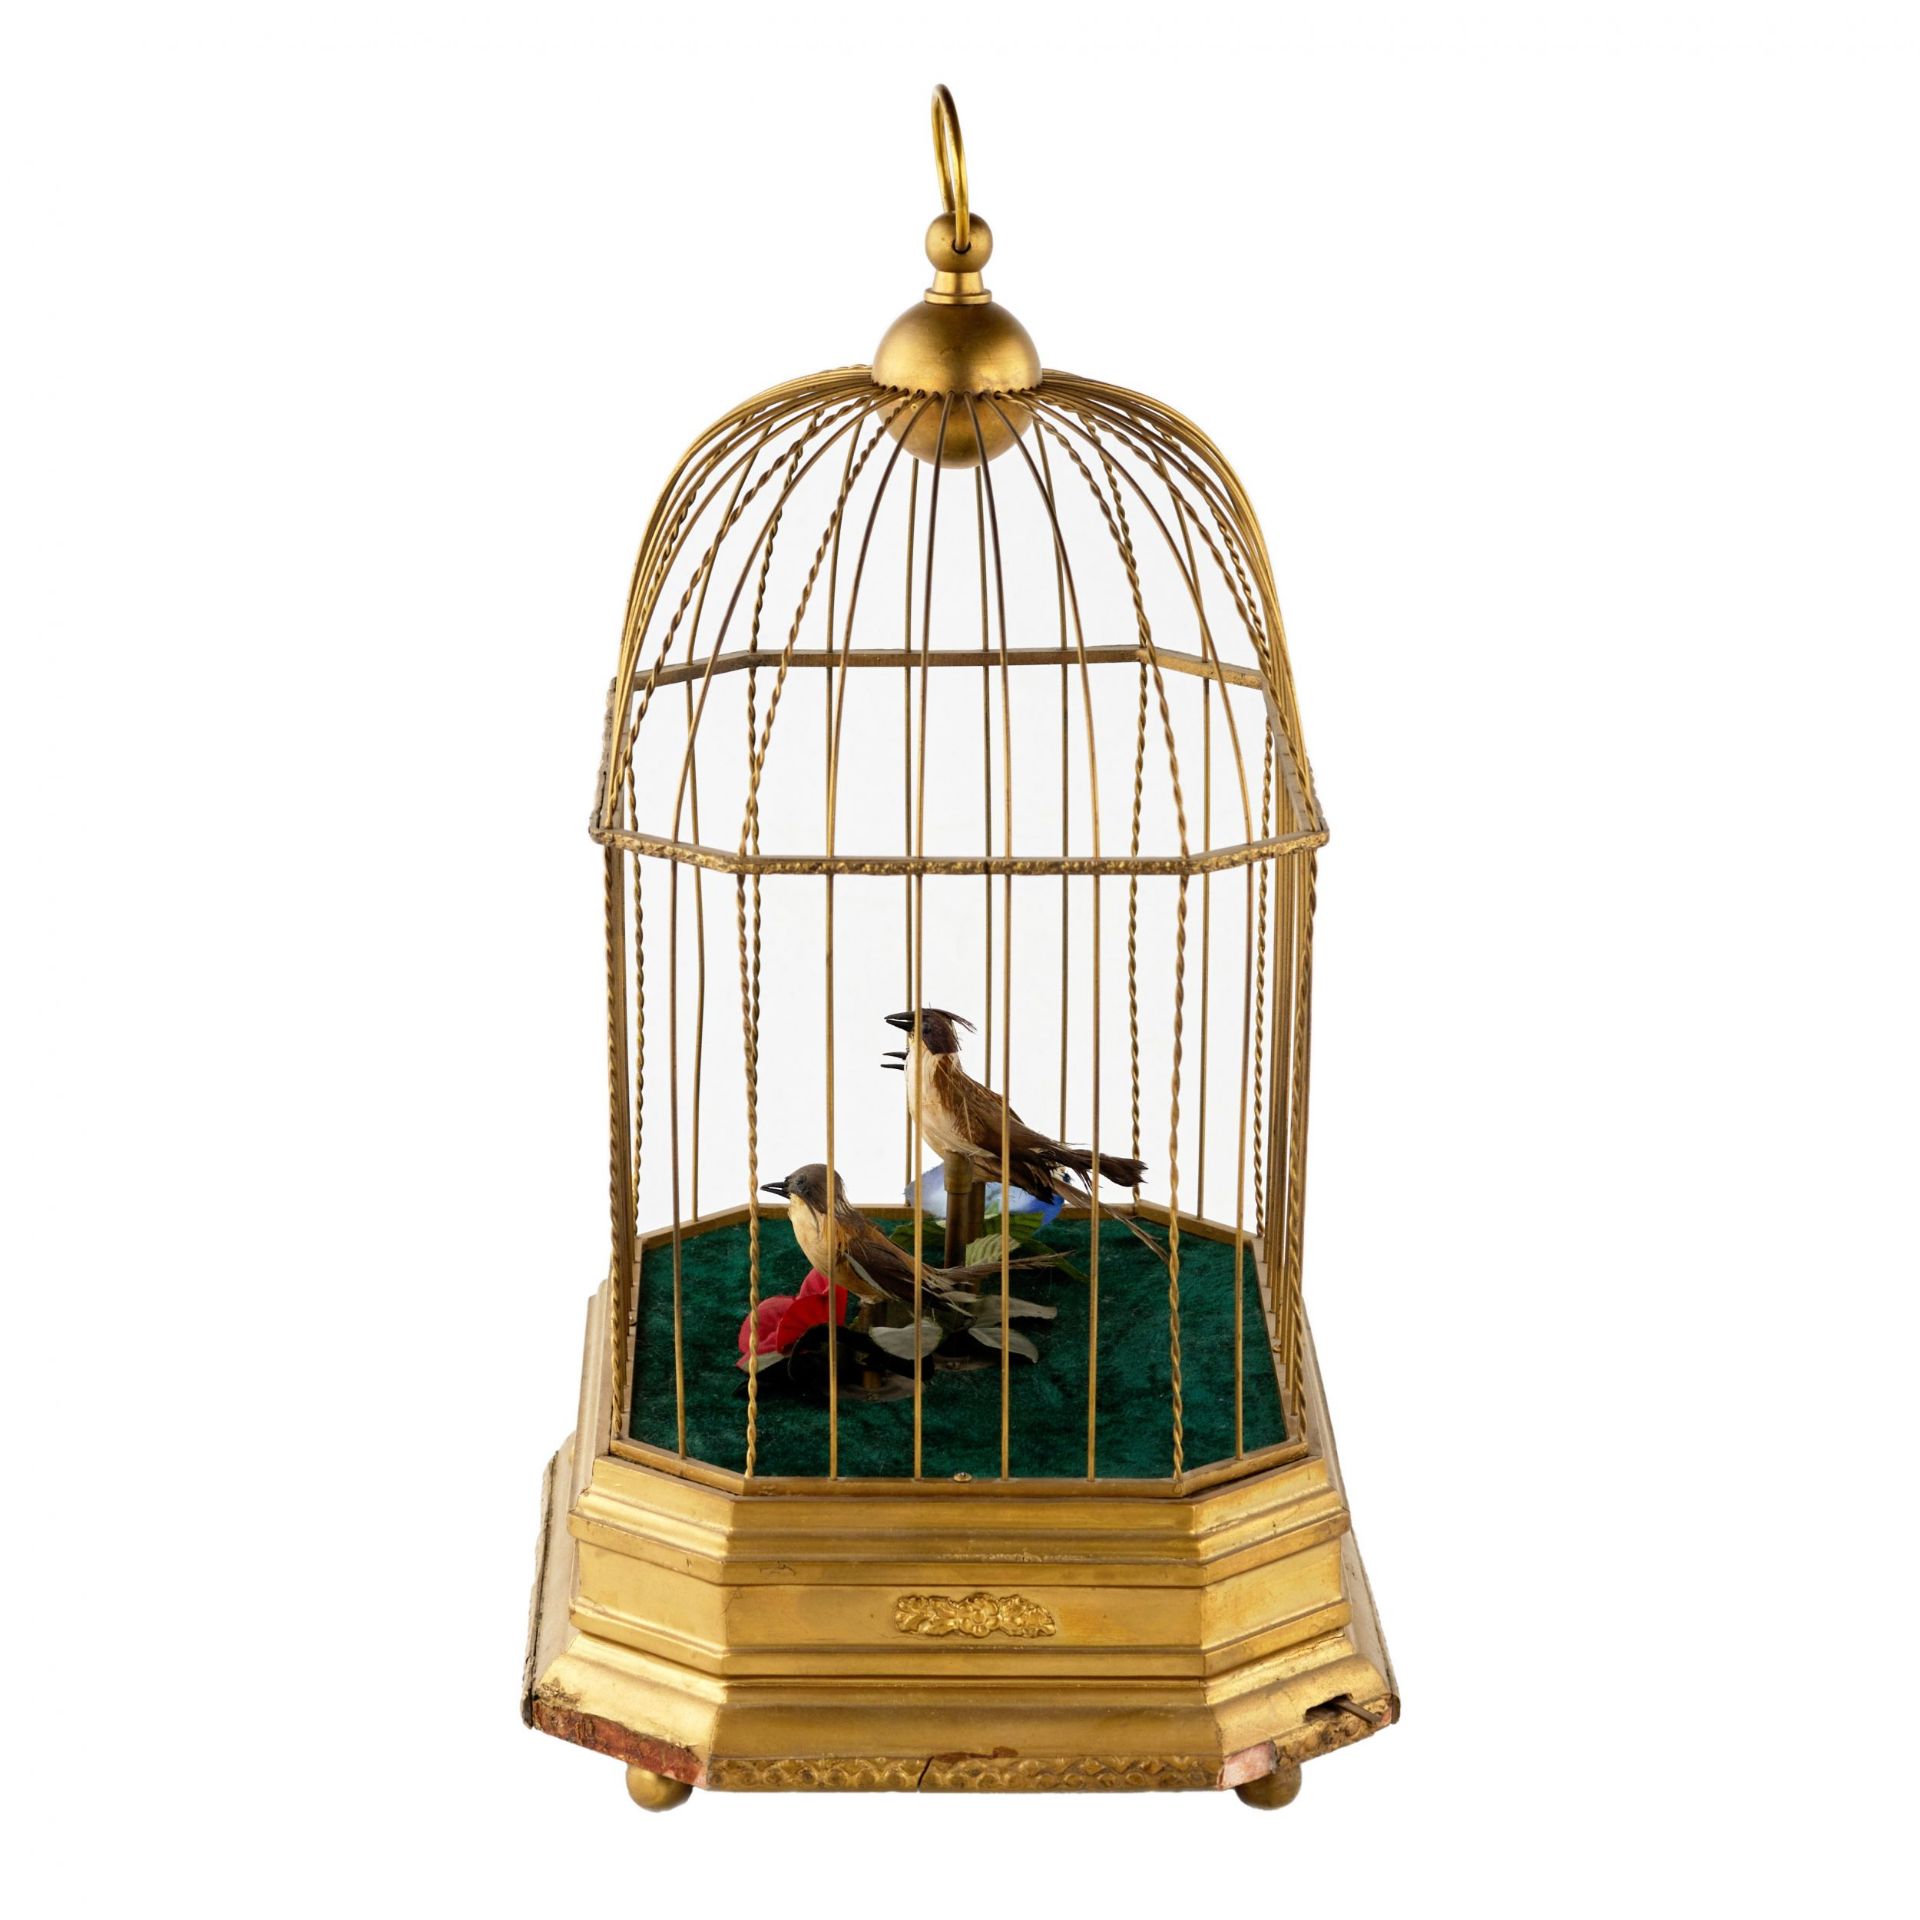 Musical toy - Cage with birds. - Image 3 of 6